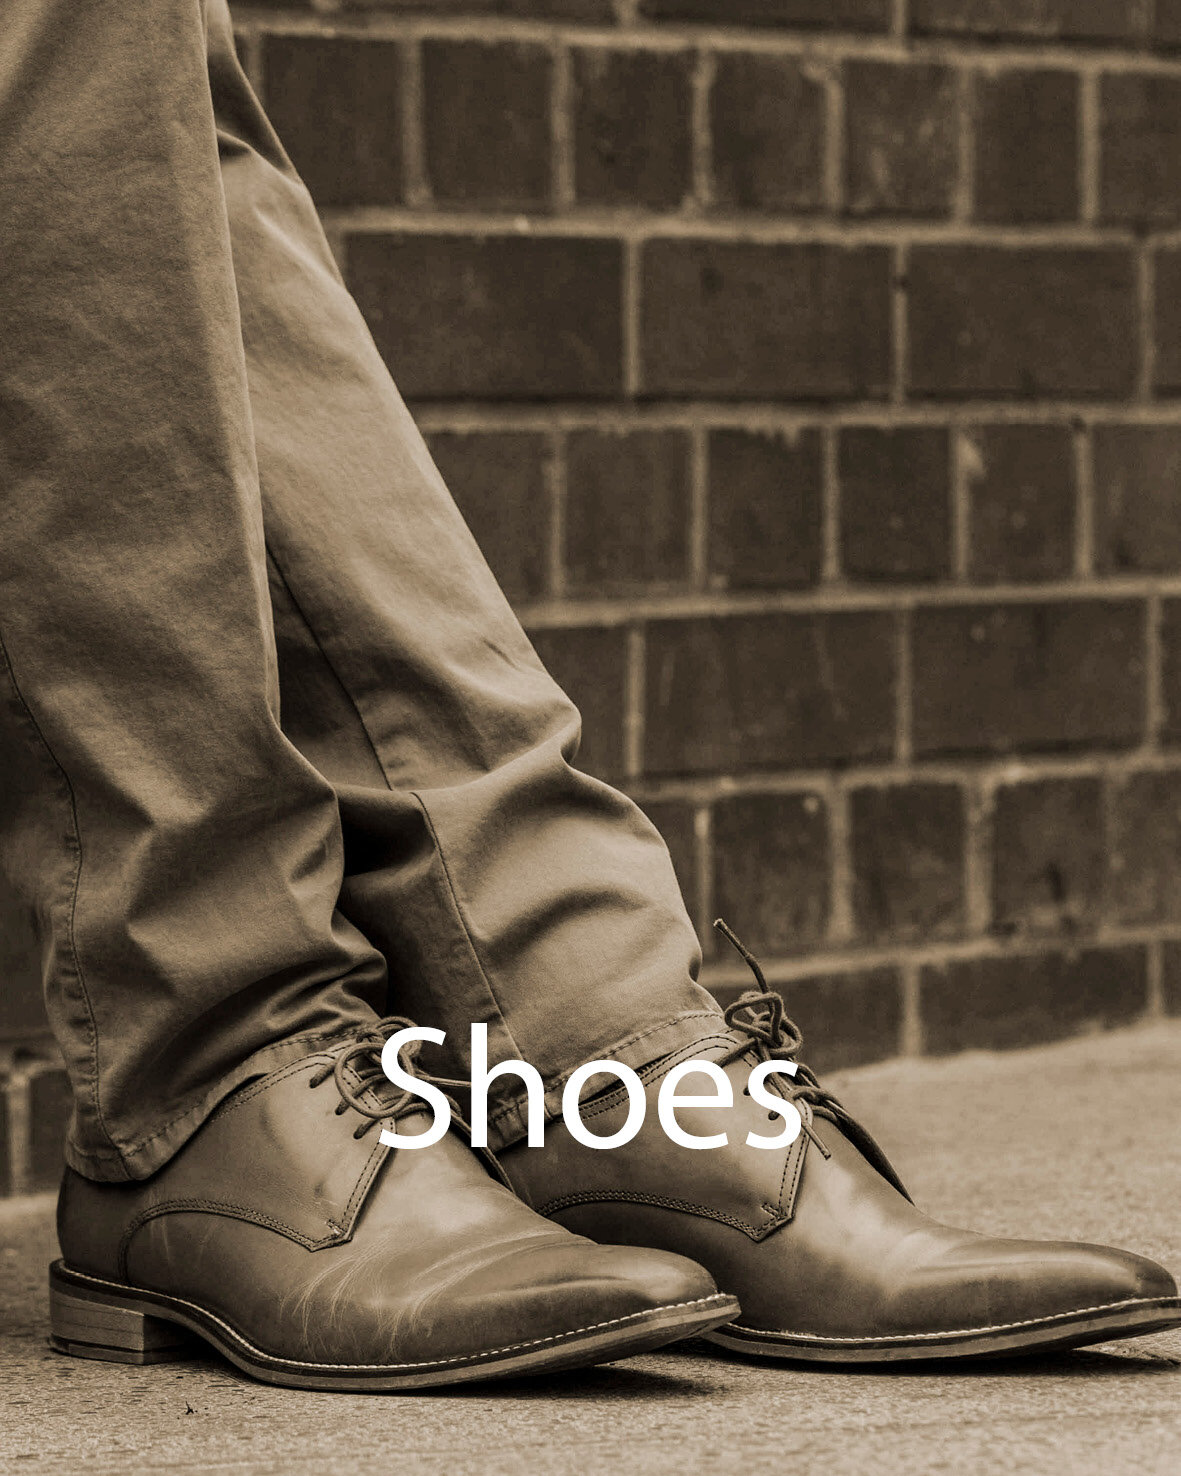 Image gateway for Shoes page on Symonds of Hereford website